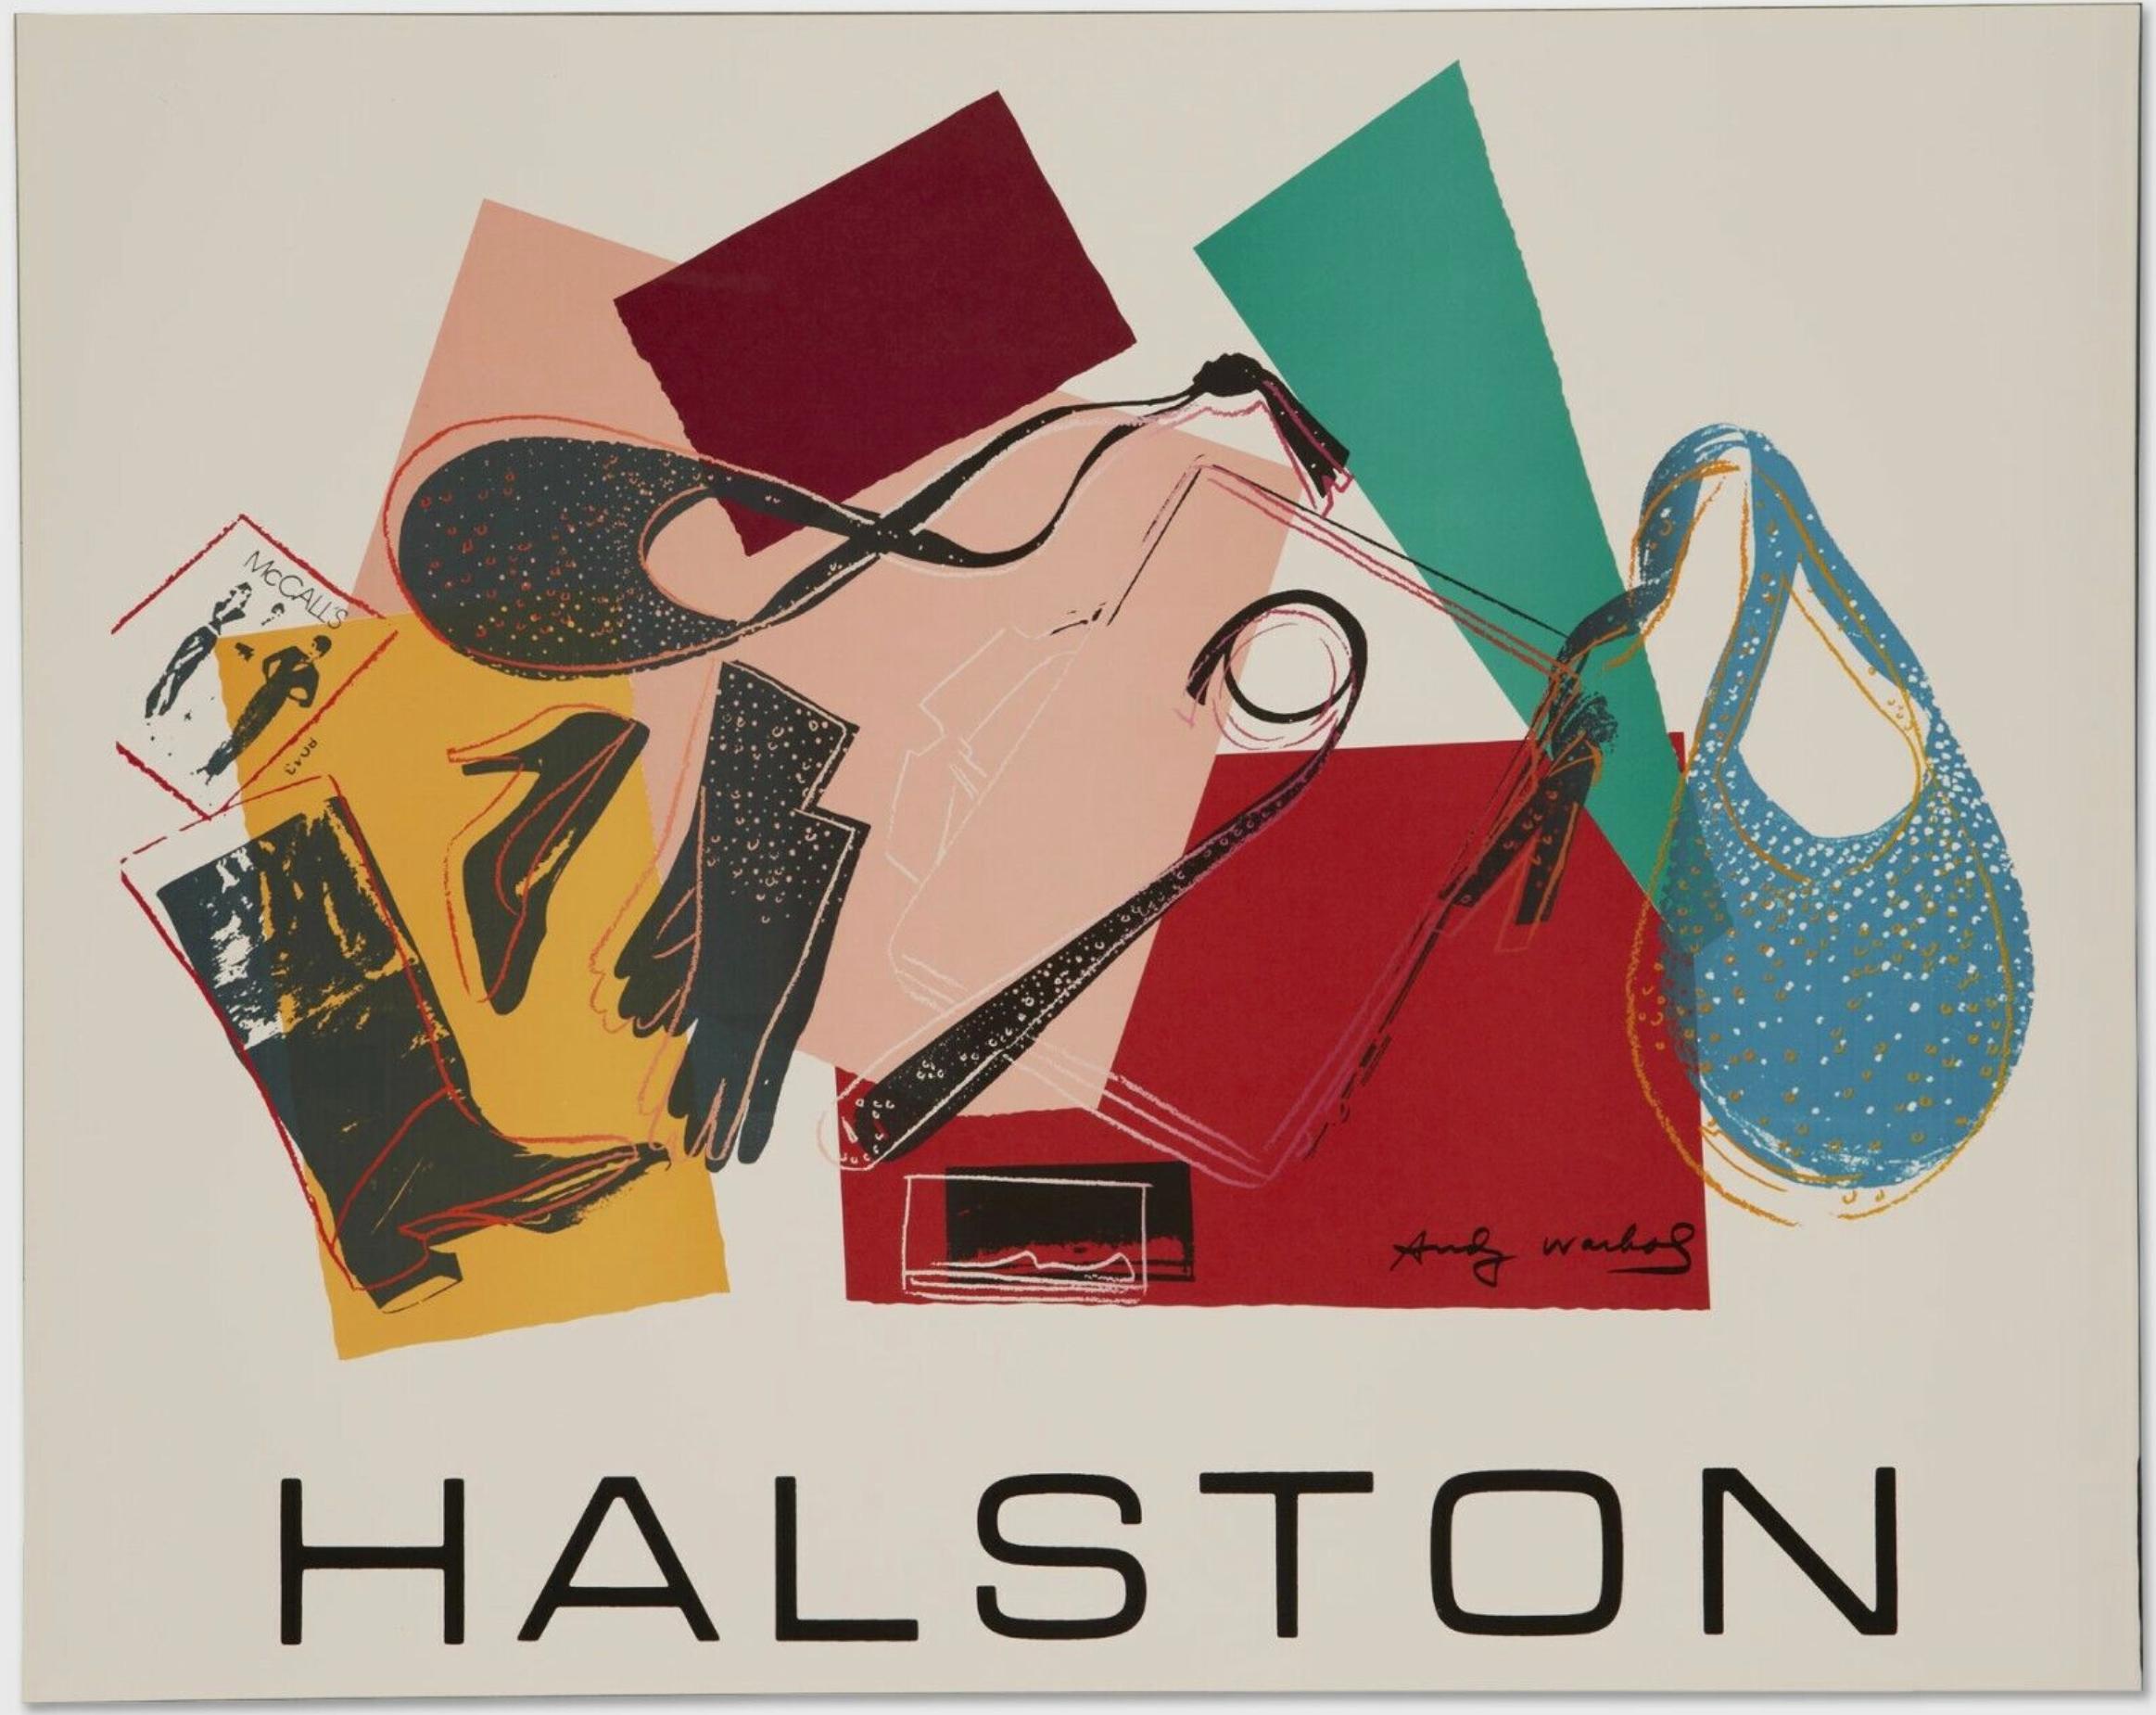 Andy Warhol - Halston Women's accessories Advertising Campaign Poster